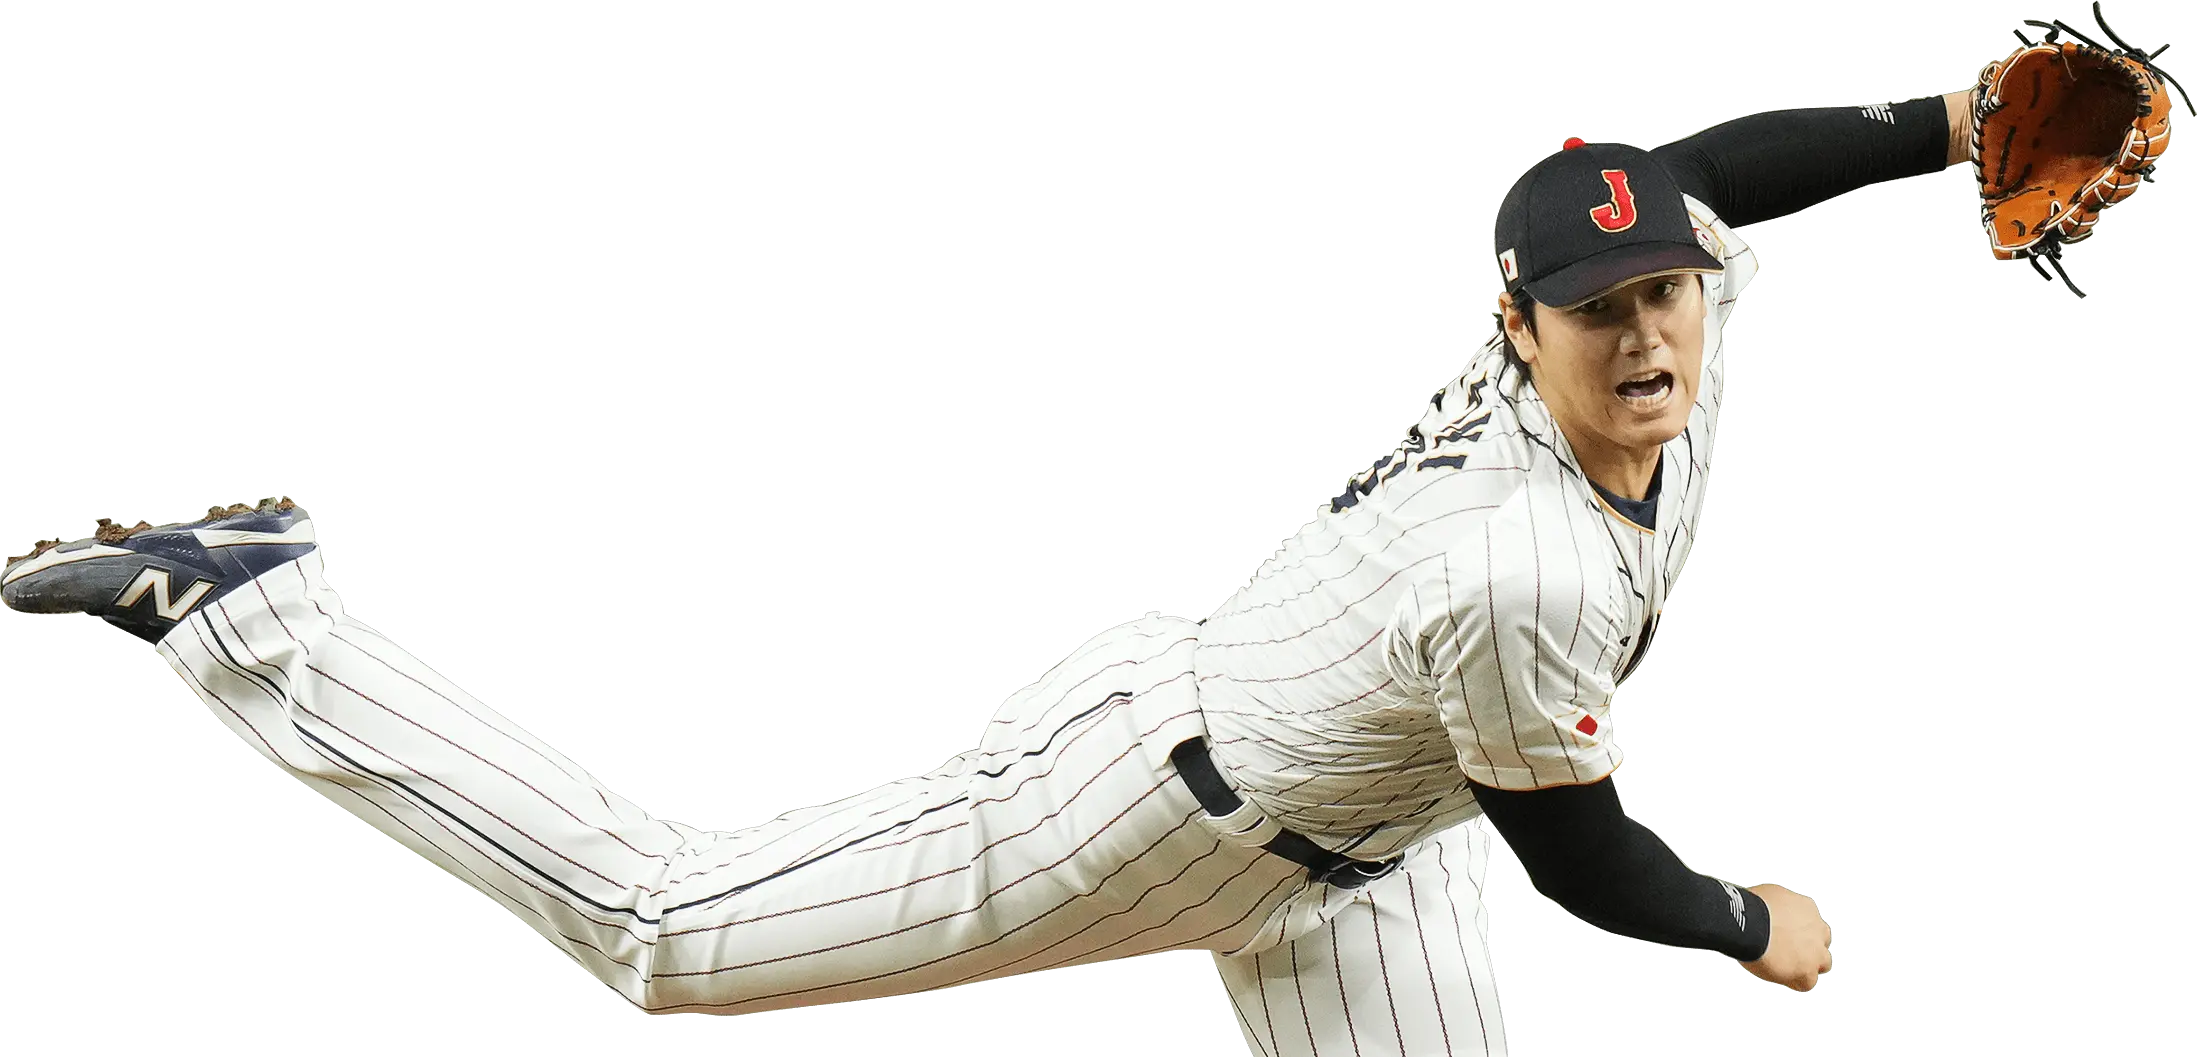 Shohei Ohtani delivering a powerful pitch.